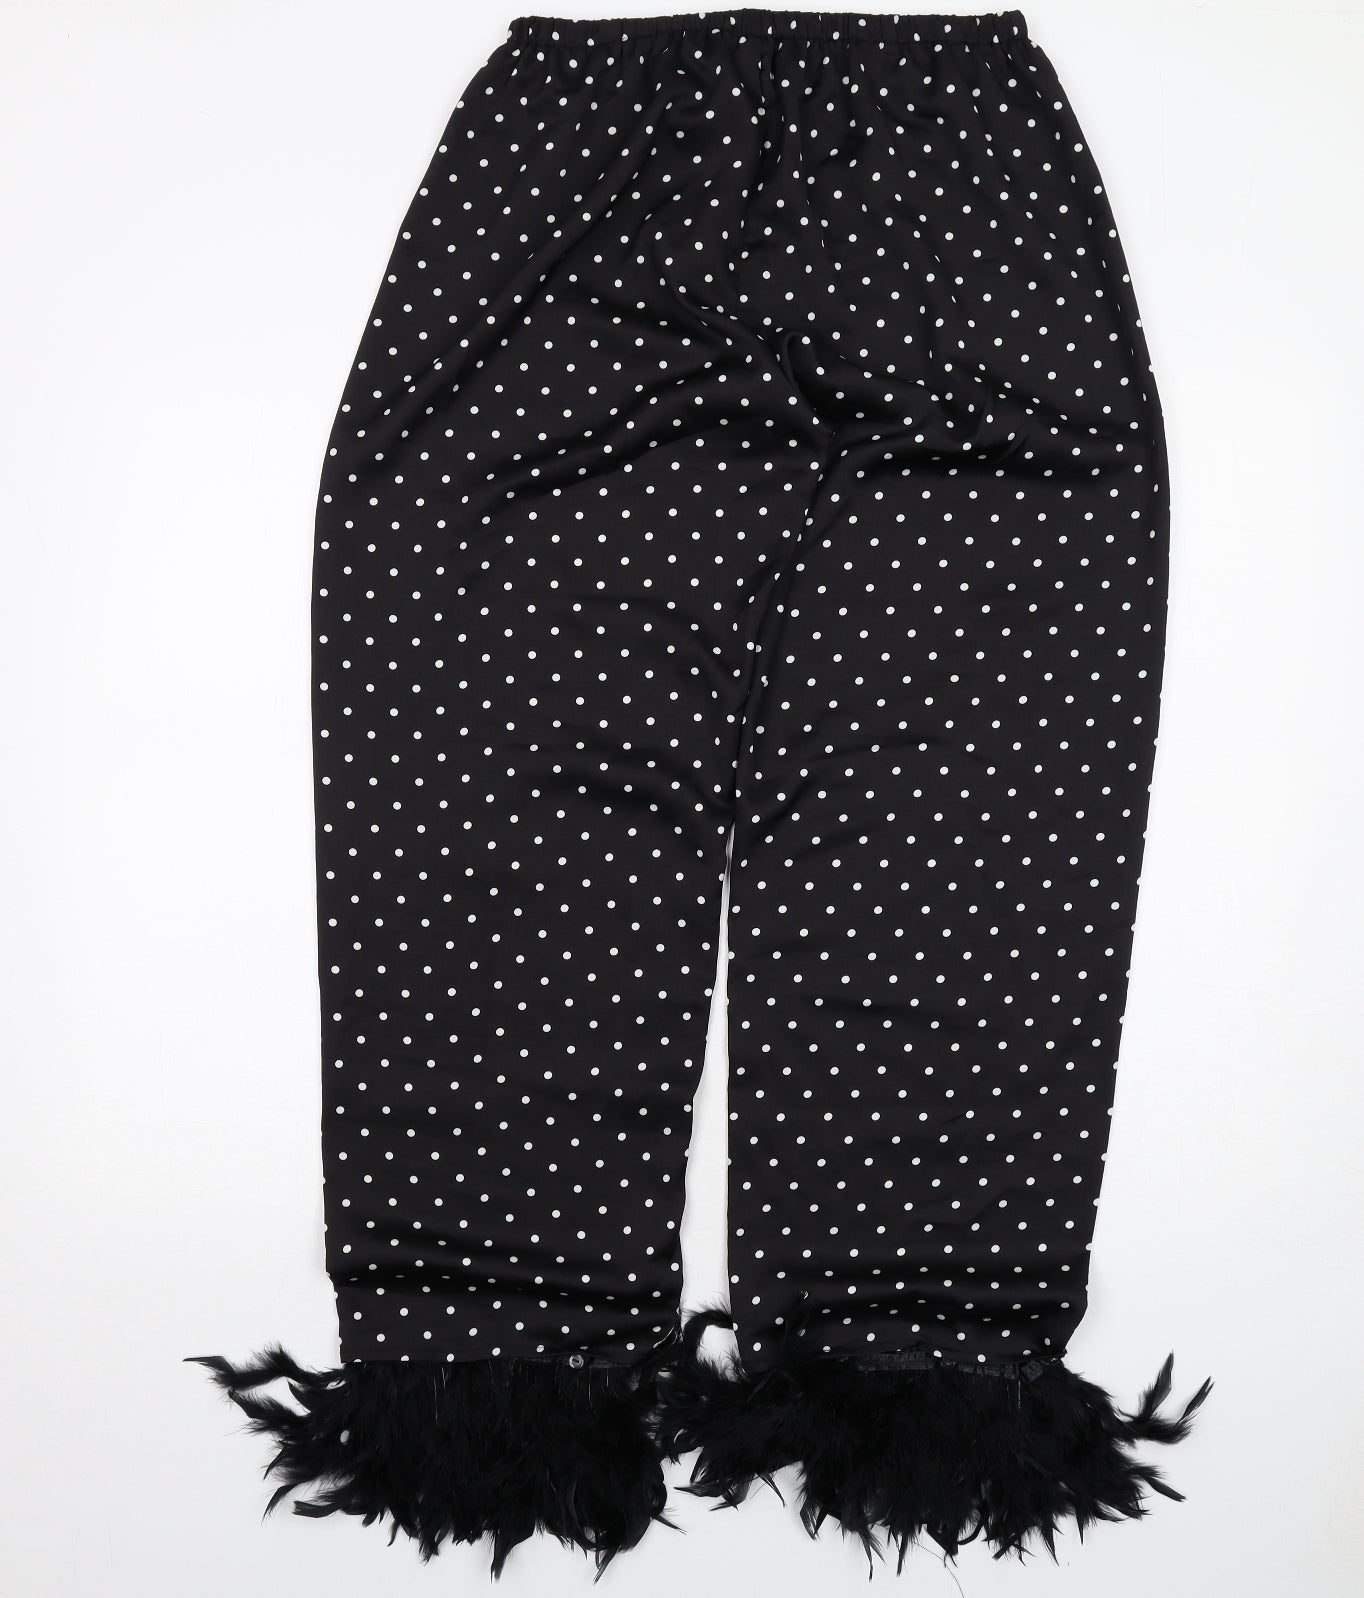 Cameo Rose Womens Black Polka Dot Polyester Trousers Size 14 Regular - Feather Cuff